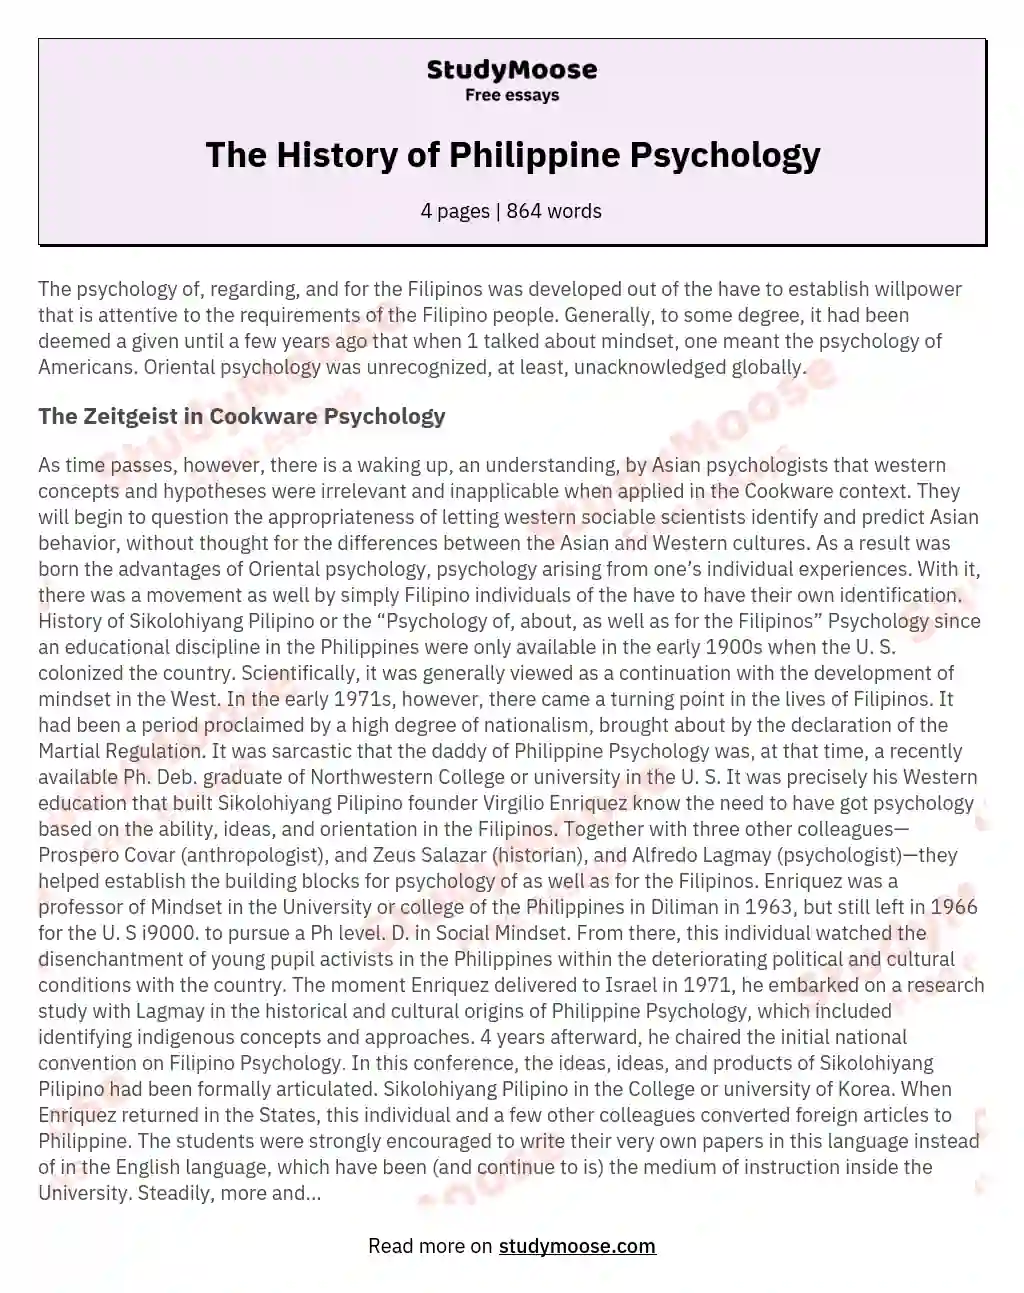 The History of Philippine Psychology essay